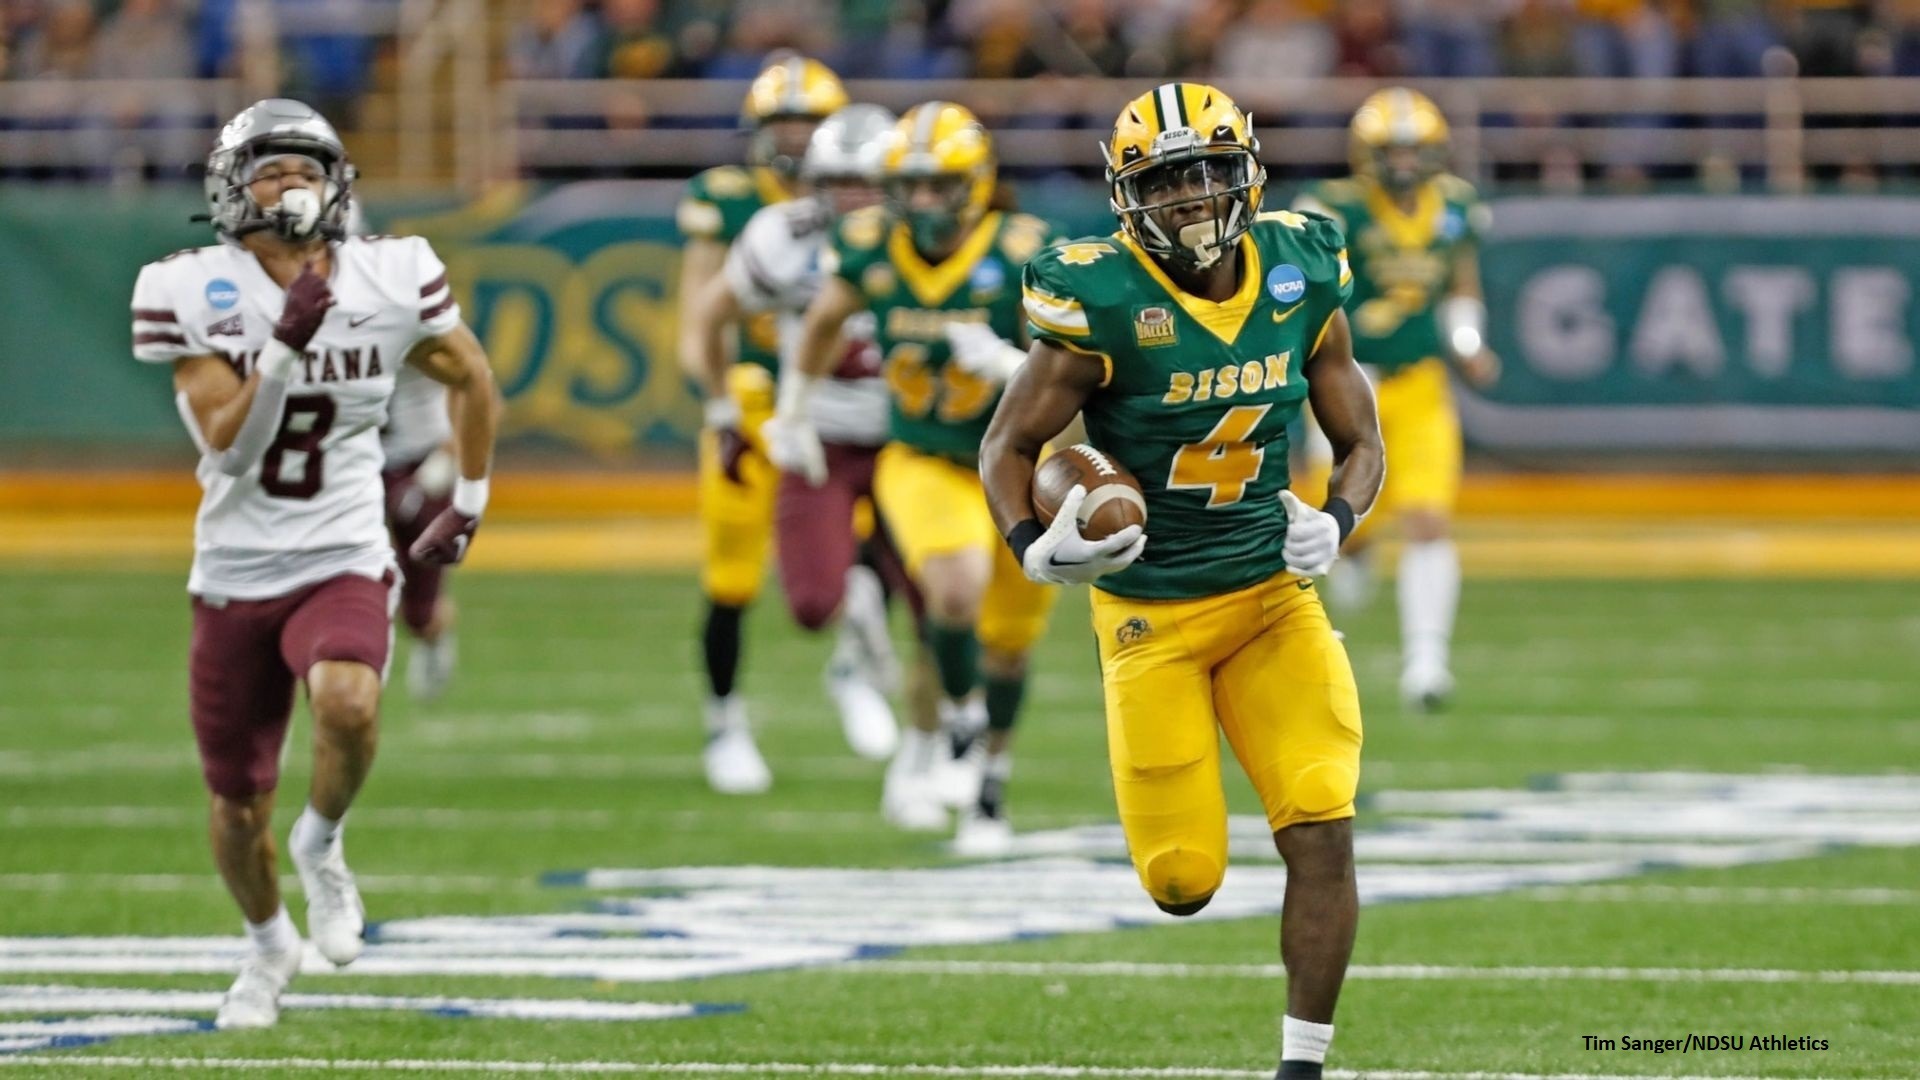 FCS Quarterfinal-Round Playoff Preview and Prediction: Samford at North Dakota State